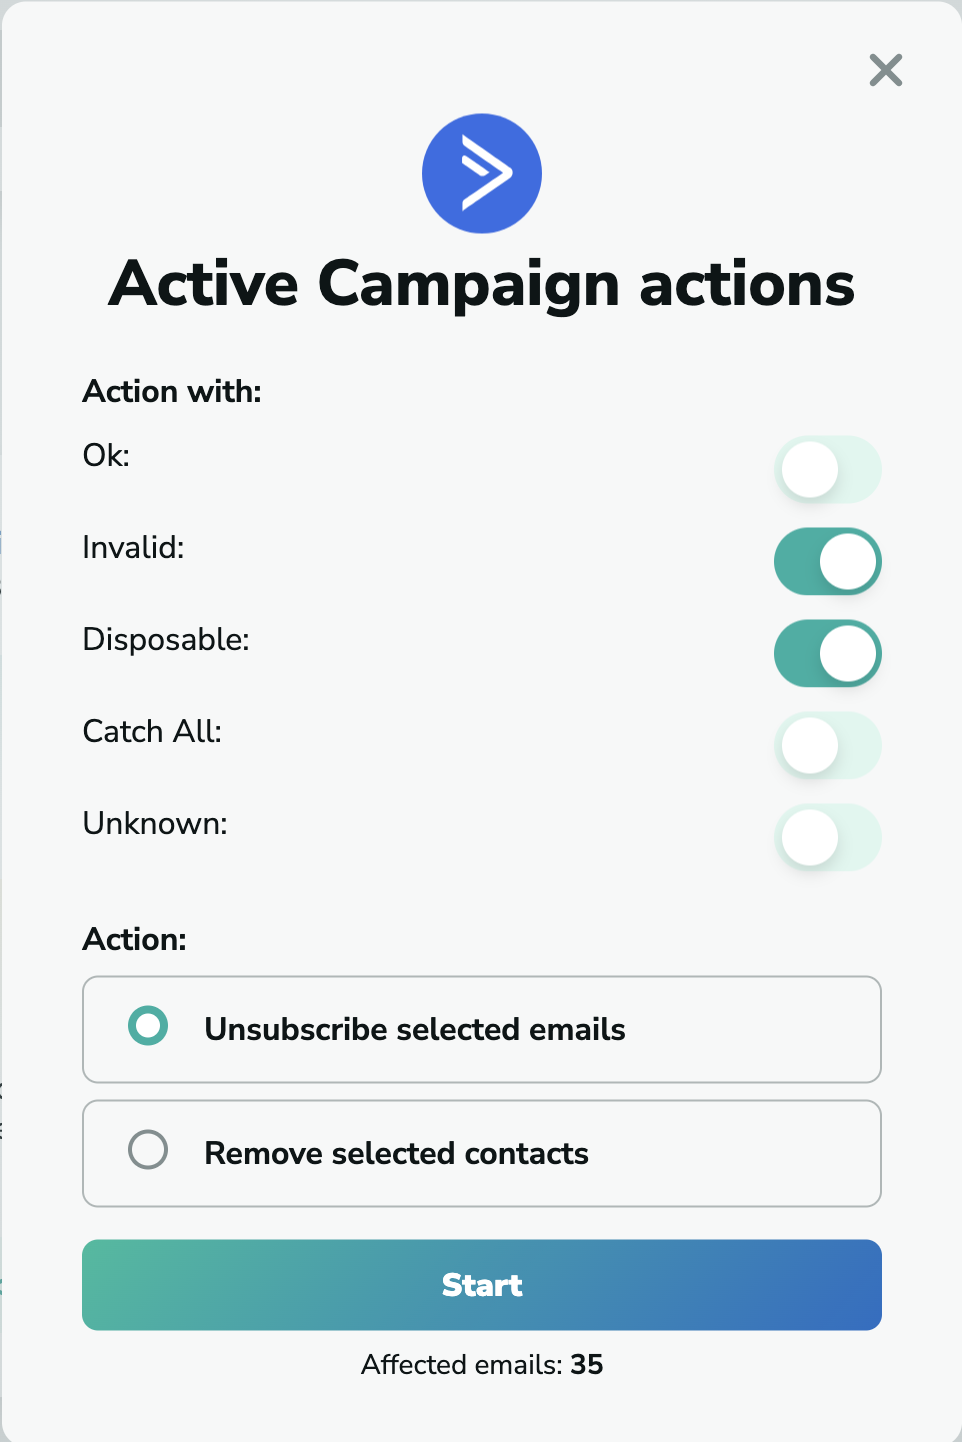 Active Campaign unsubscribe emails in MillionVerifier